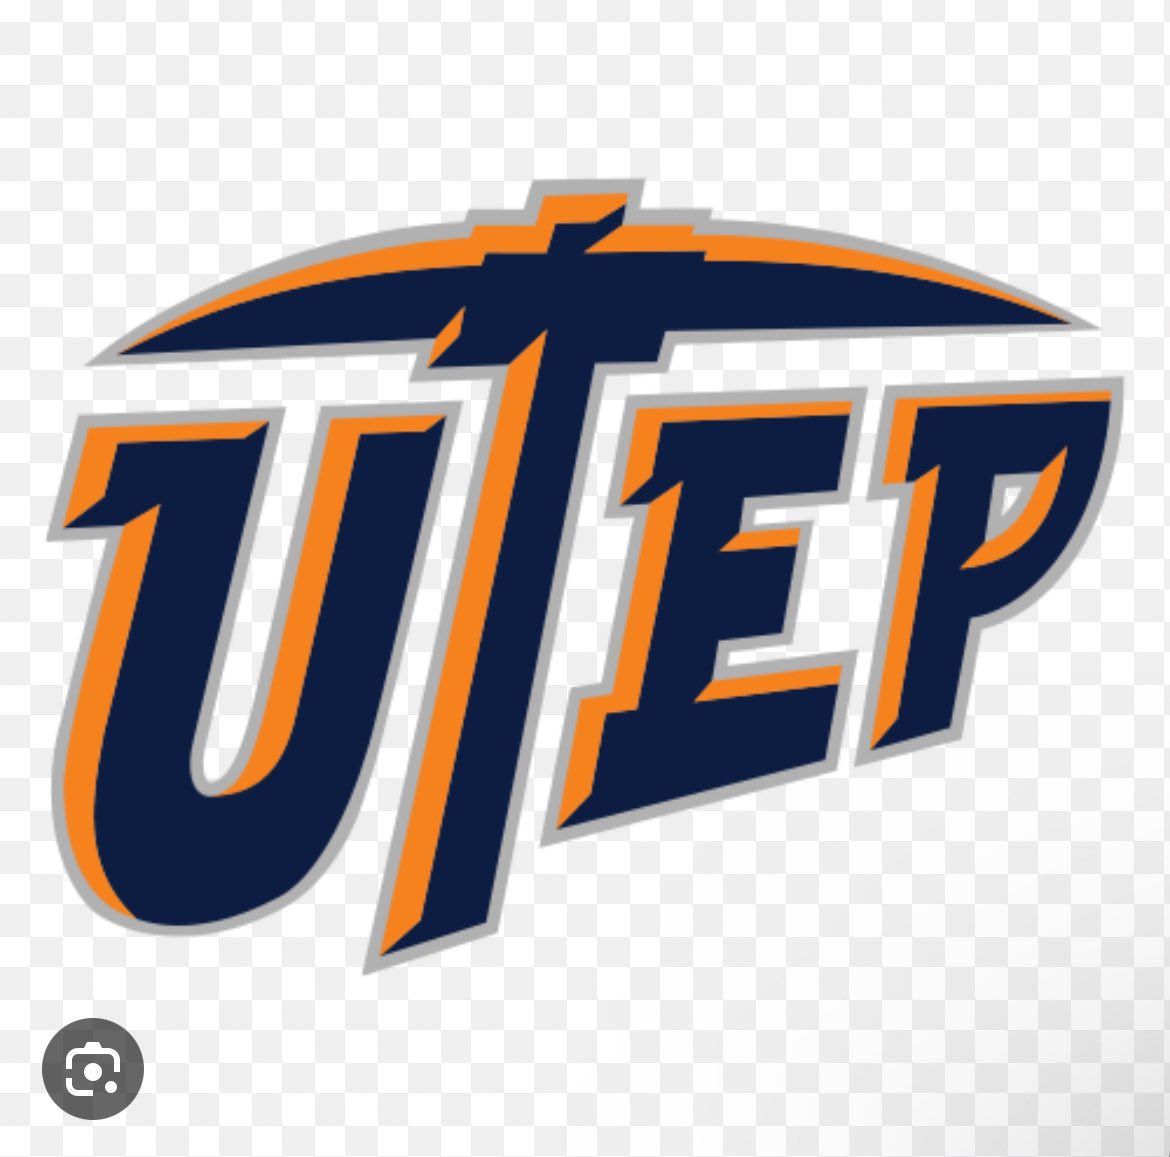 I’m lost for words man I don’t even know what to say heart racing but I’m blessed to receive my first Division 1(collegiate) offer from The University of Texas at El Paso miners. Thank you all ❤️ @JColemanFB @CoachFinn_ @SKYLINEfb @COACHJMACRB @UTEPFB @JaiNeilLewis05 #AGTG